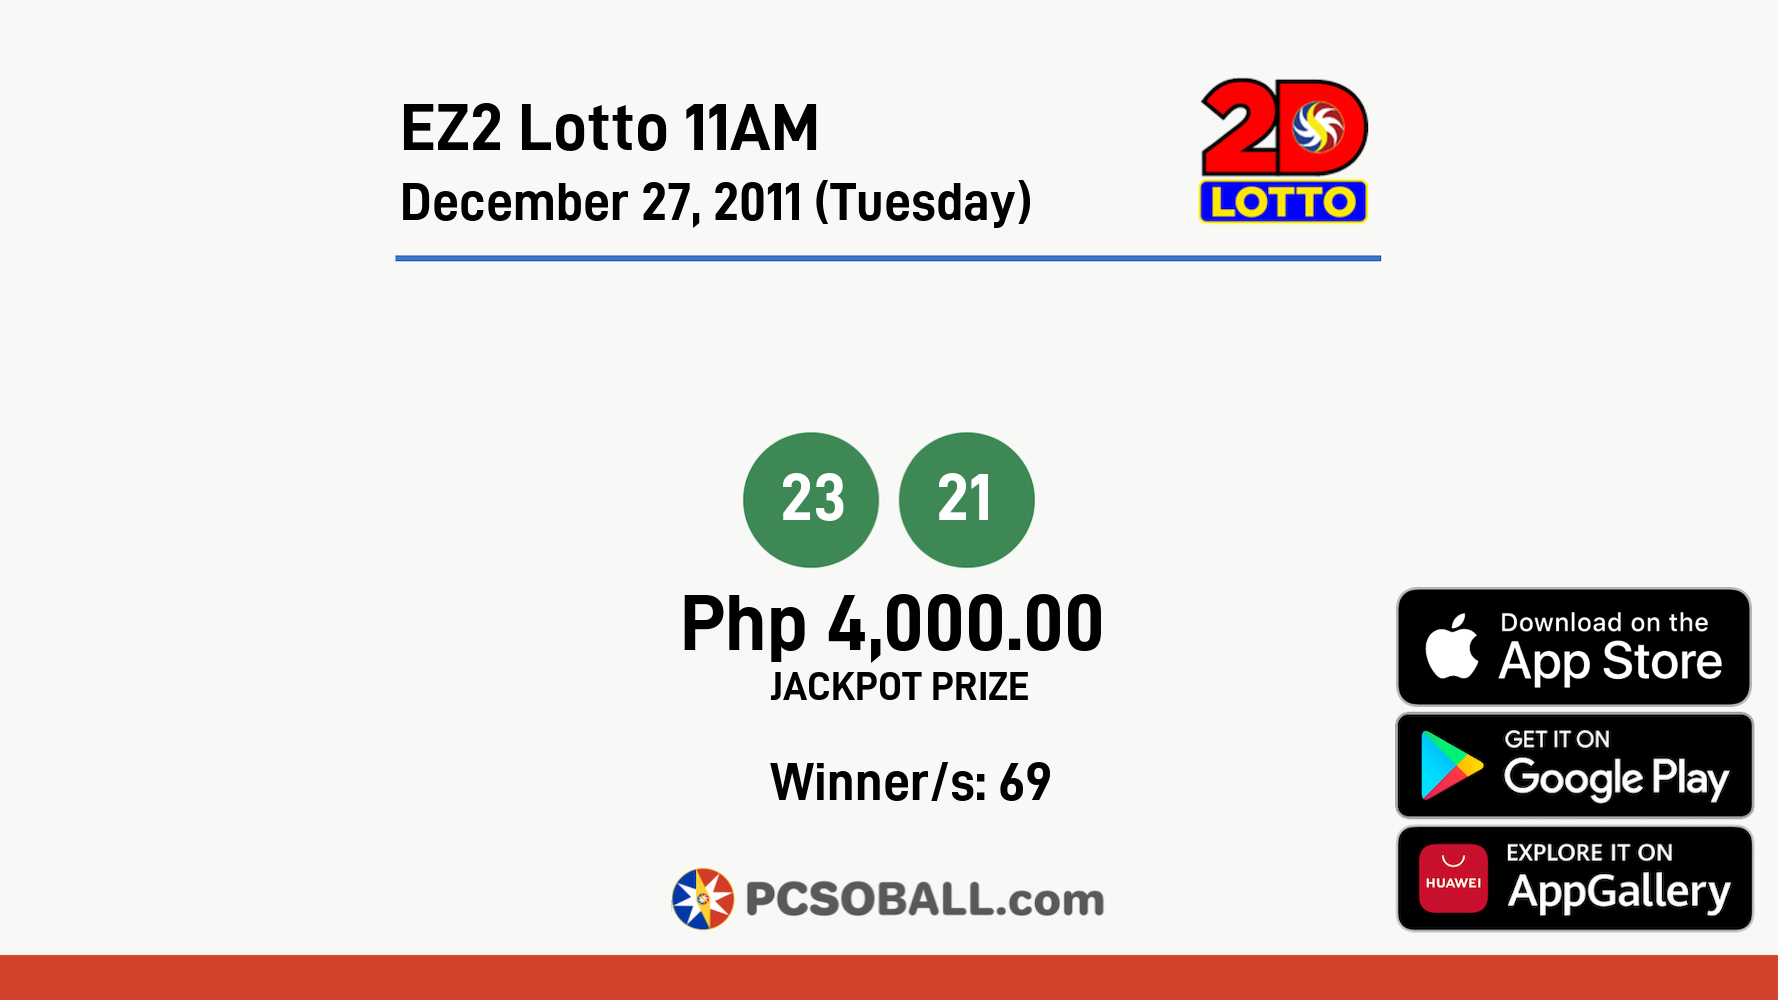 EZ2 Lotto 11AM December 27, 2011 (Tuesday) Result